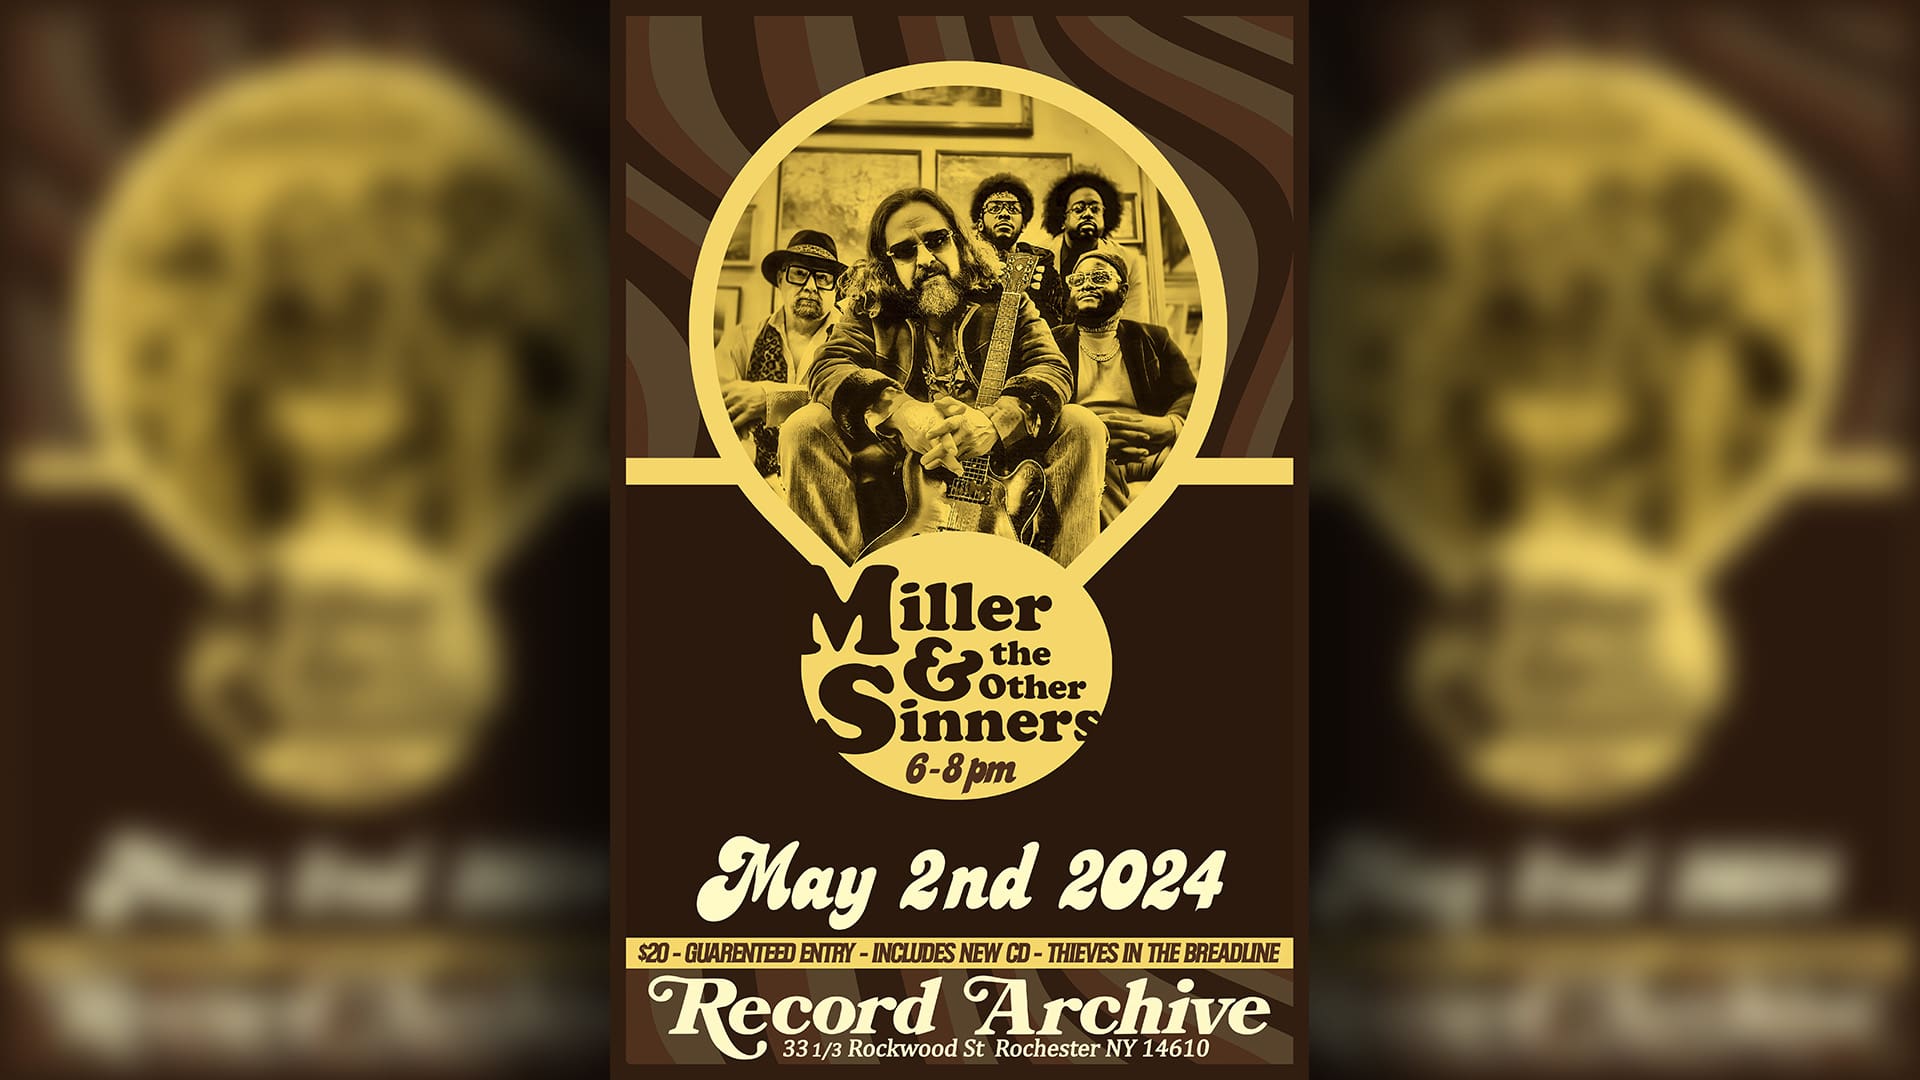 Miller and The Other Sinners. 6-8pm. May 2nd 2024. $20. Guaranteed Entry. Includes new CD- Thieves in The Breadline. Record Archive 33 1/3 Rockwood St Rochester NY 14610.